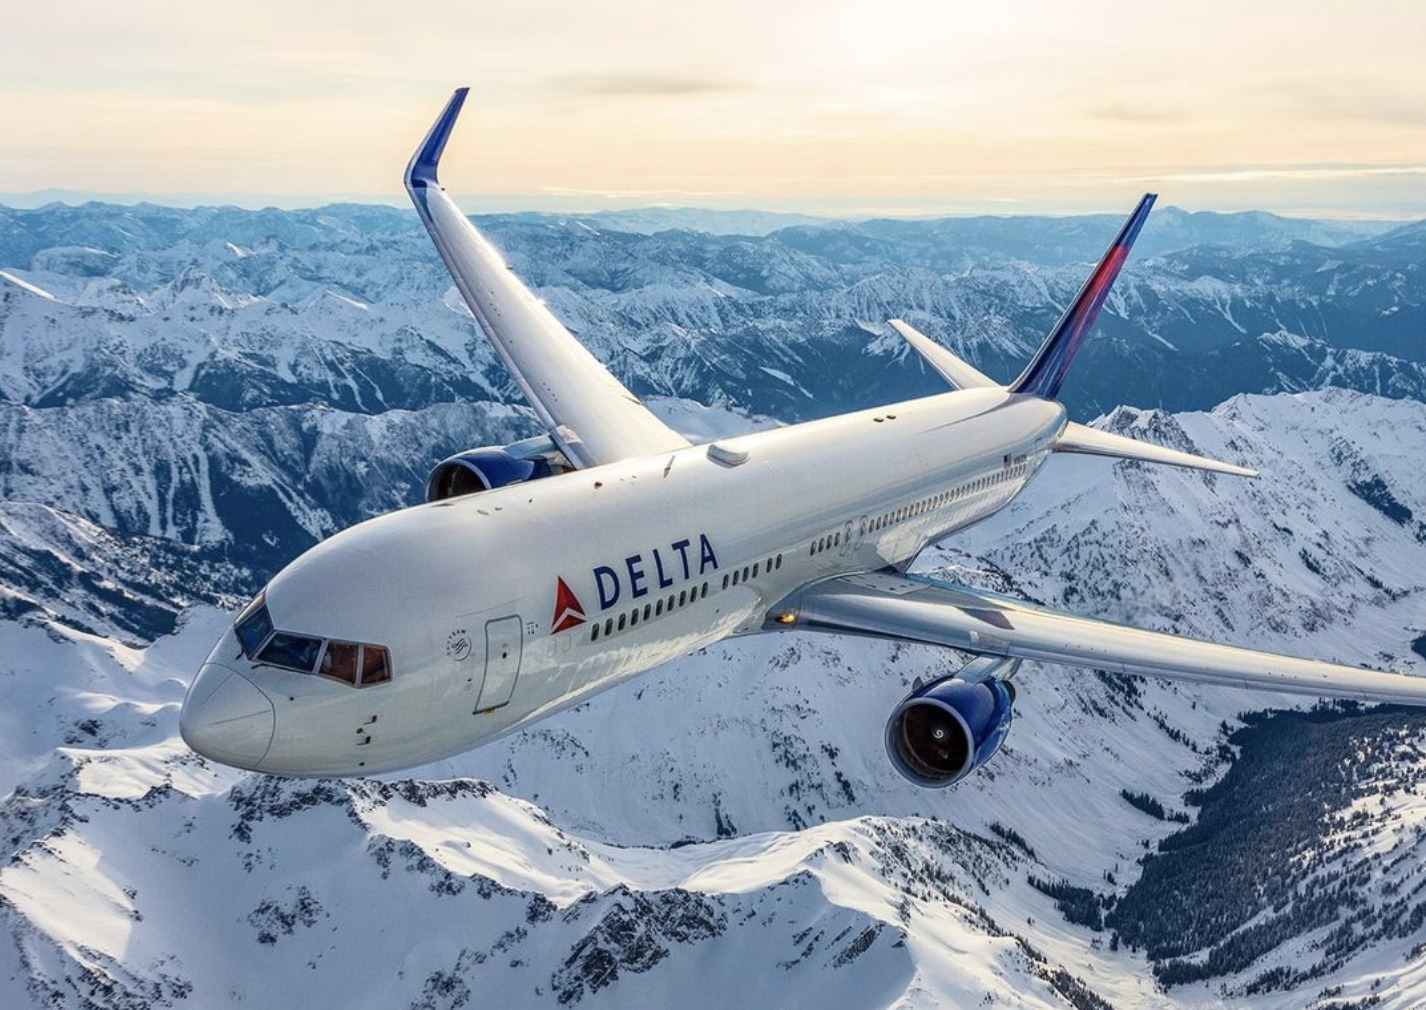 Delta Air Lines announces March quarter 2021 financial results - Skies Mag